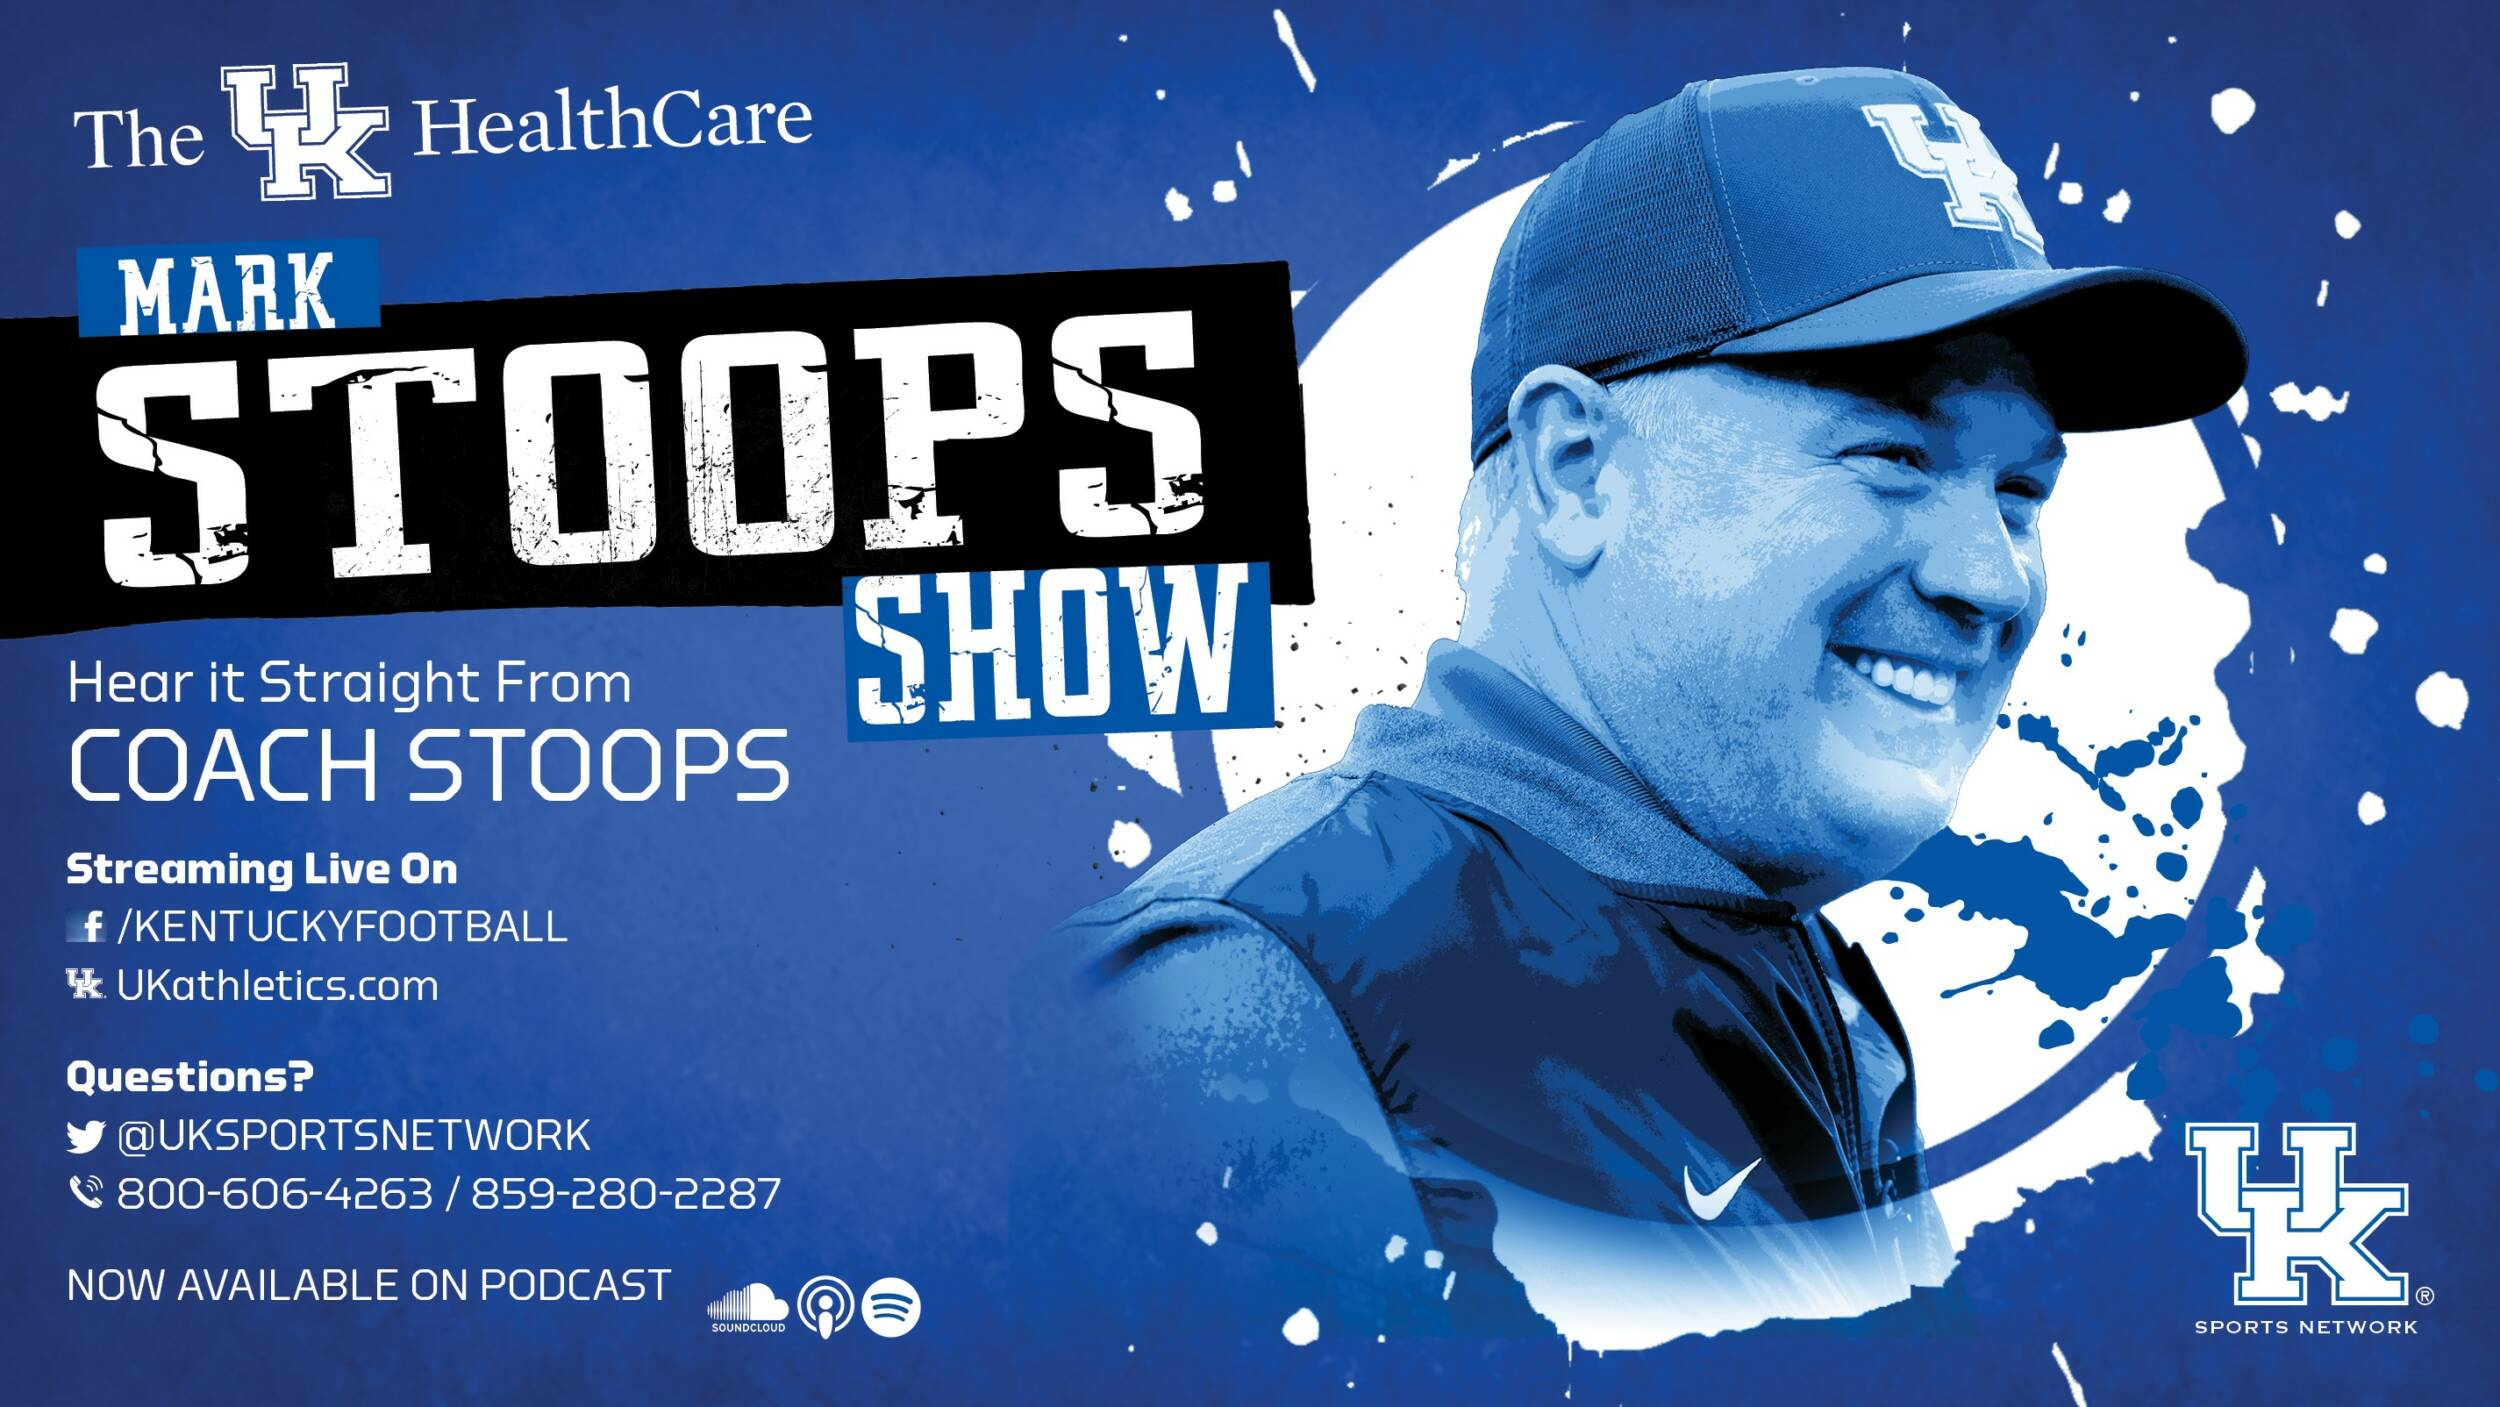 UK HealthCare Mark Stoops Show November 9th 2022 with special guest Vince Marrow.